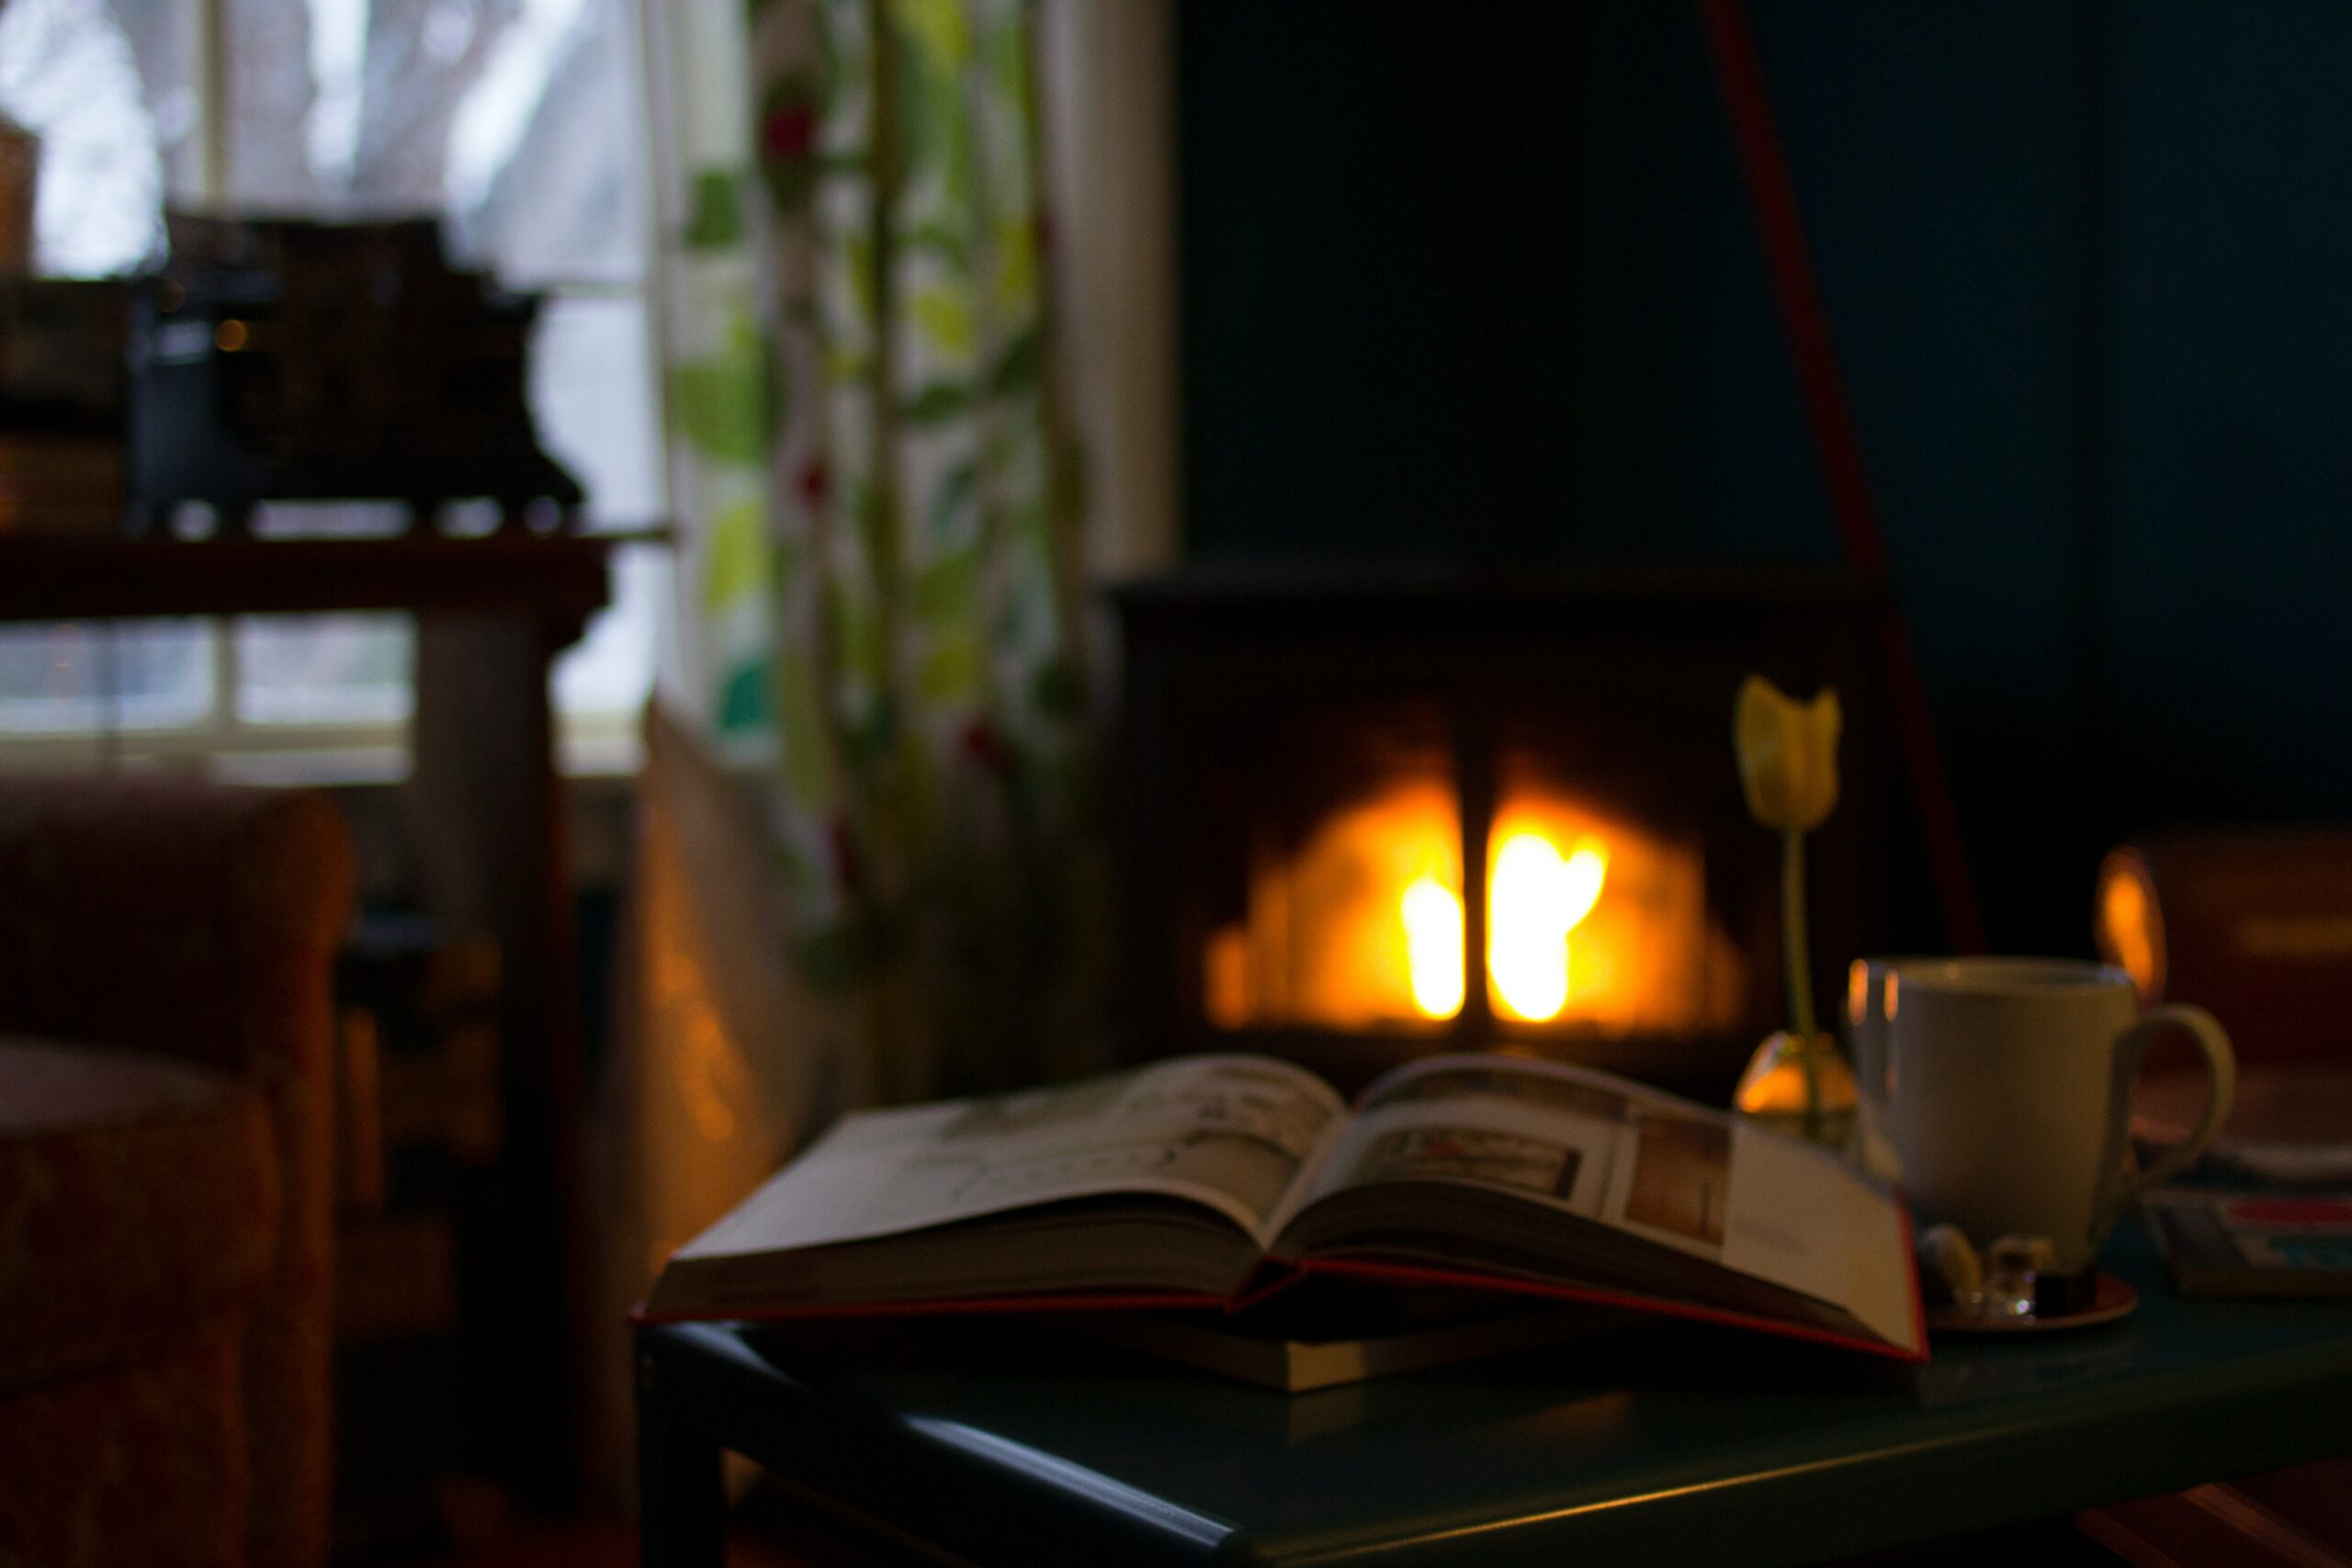 An open book in front of a lit fireplace